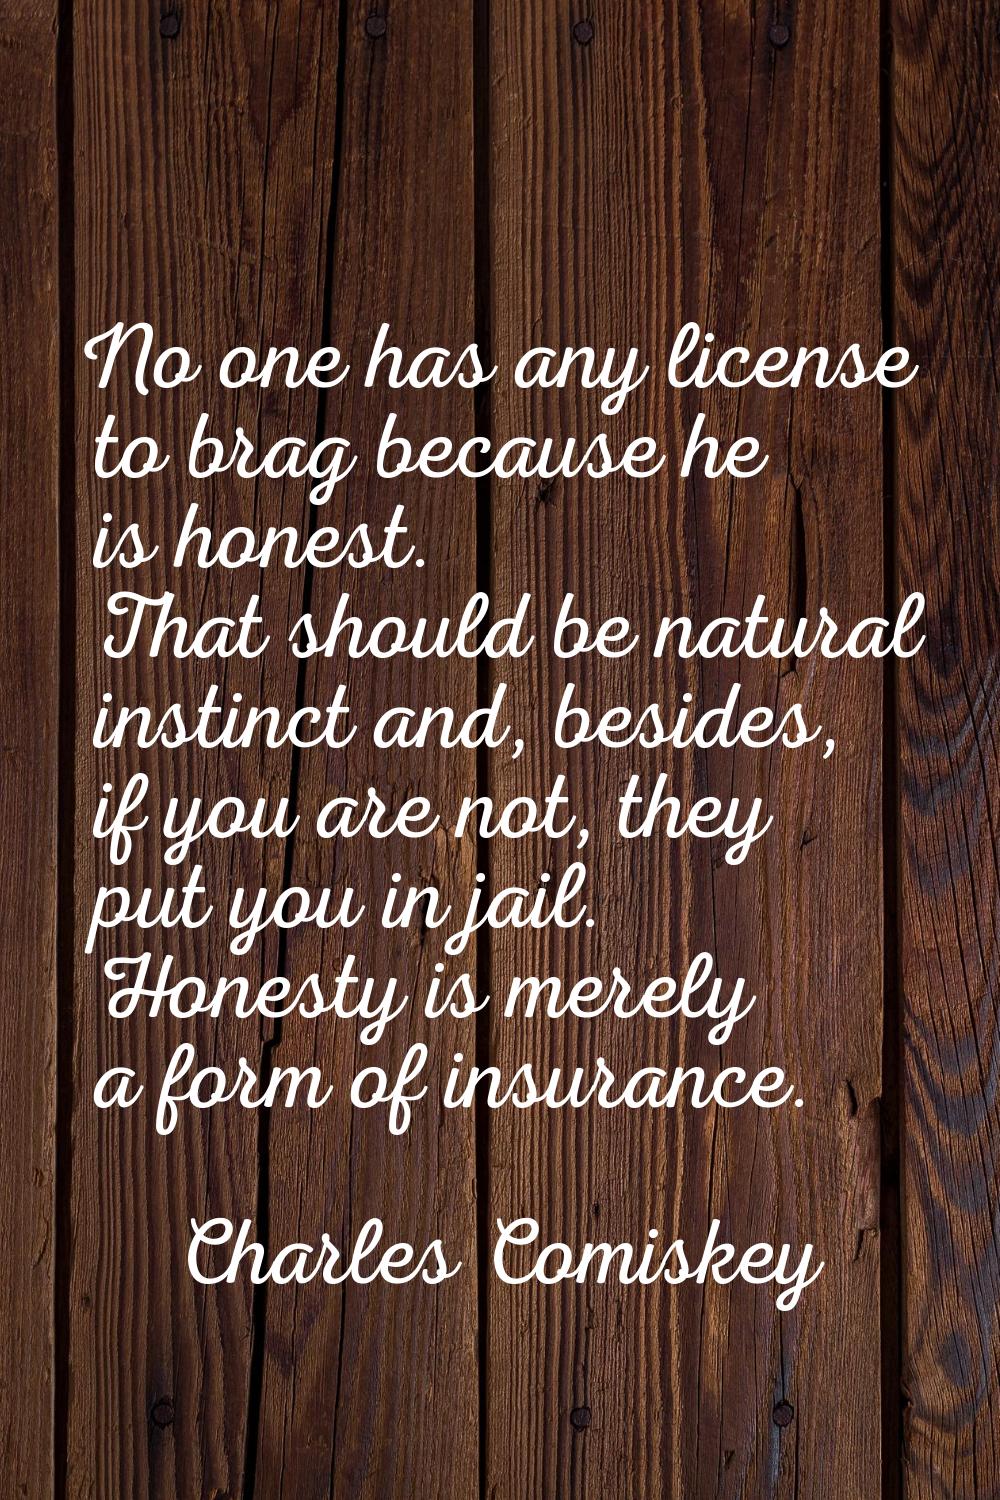 No one has any license to brag because he is honest. That should be natural instinct and, besides, 